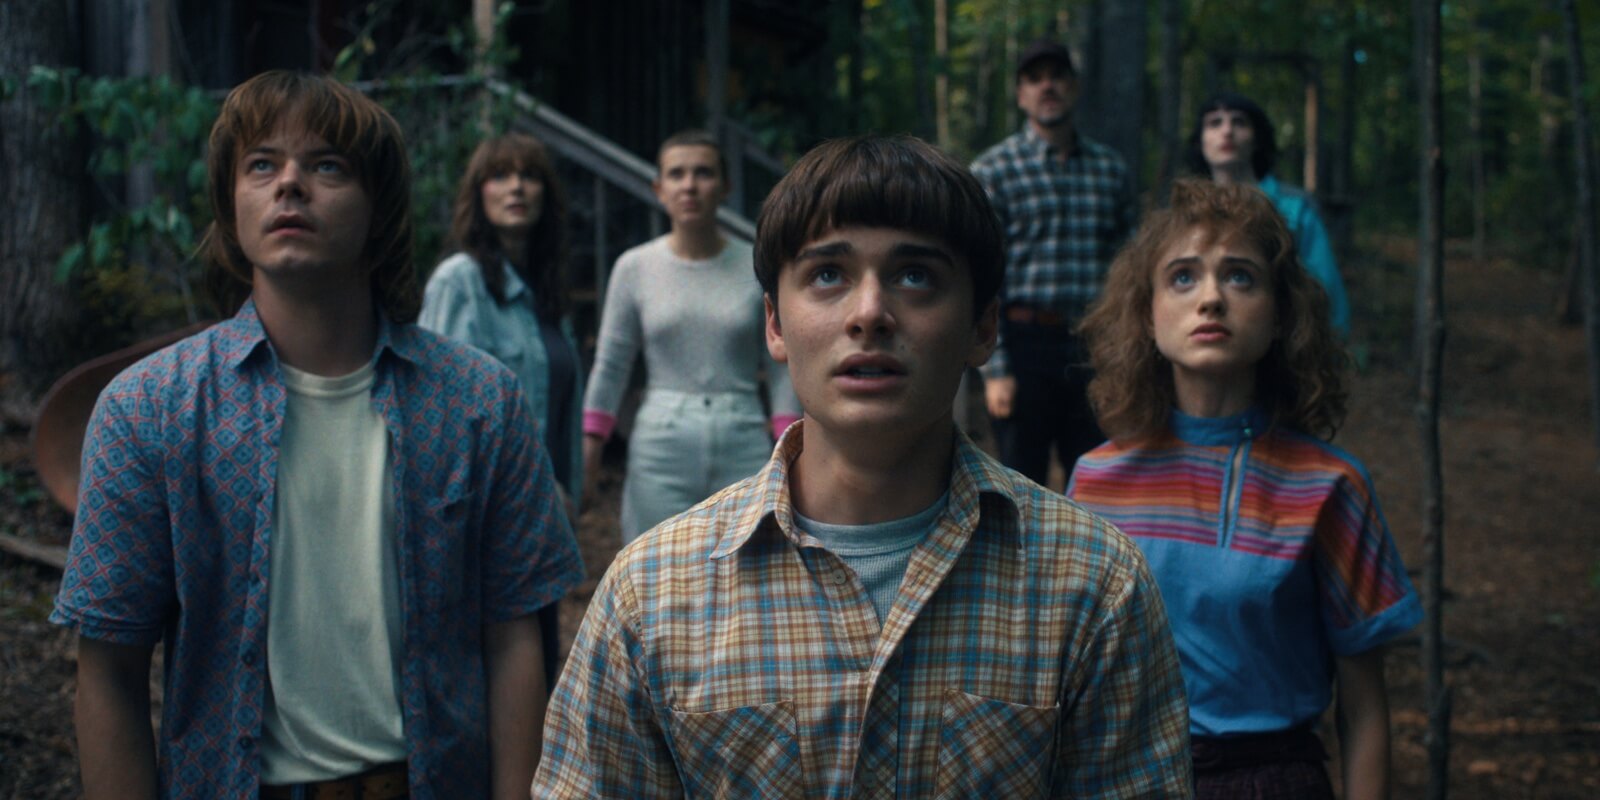 'Stranger Things' cast (L to R) Charlie Heaton as Jonathan Byers, Winona Ryder as Joyce Byers, Millie Bobby Brown as Eleven, Noah Schnapp as Will Byers, David Harbour as Jim Hopper, Natalia Dyer as Nancy Wheeler, and Finn Wolfhard as Mike Wheeler.